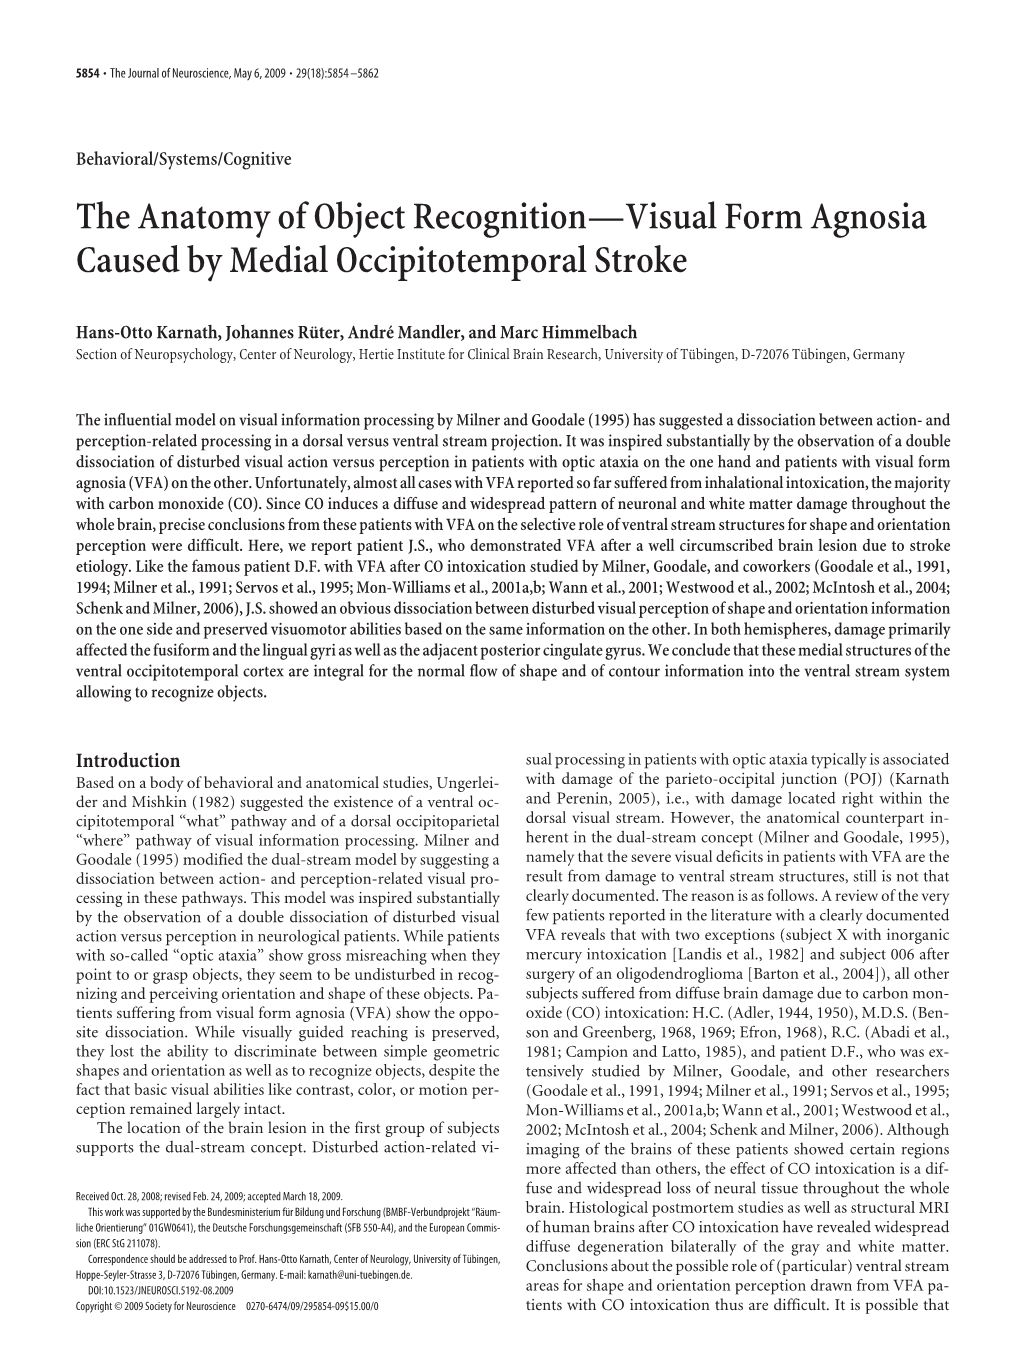 The Anatomy of Object Recognition—Visual Form Agnosia Caused by Medial Occipitotemporal Stroke